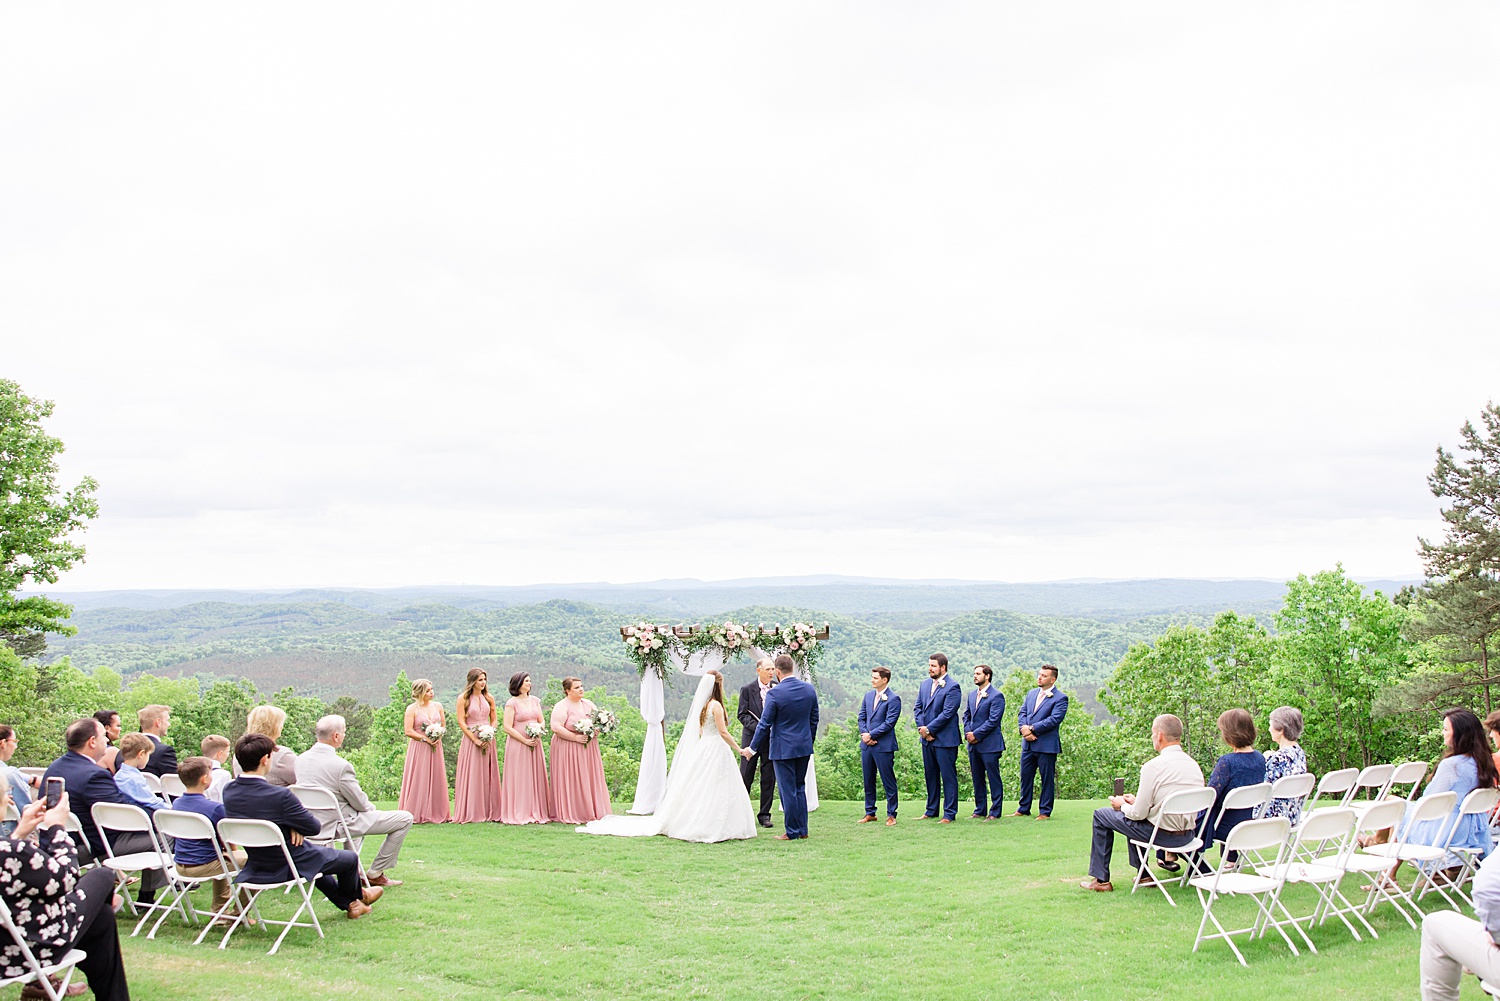 picturesque wedding ceremony on top of a hill overlooking a valley below